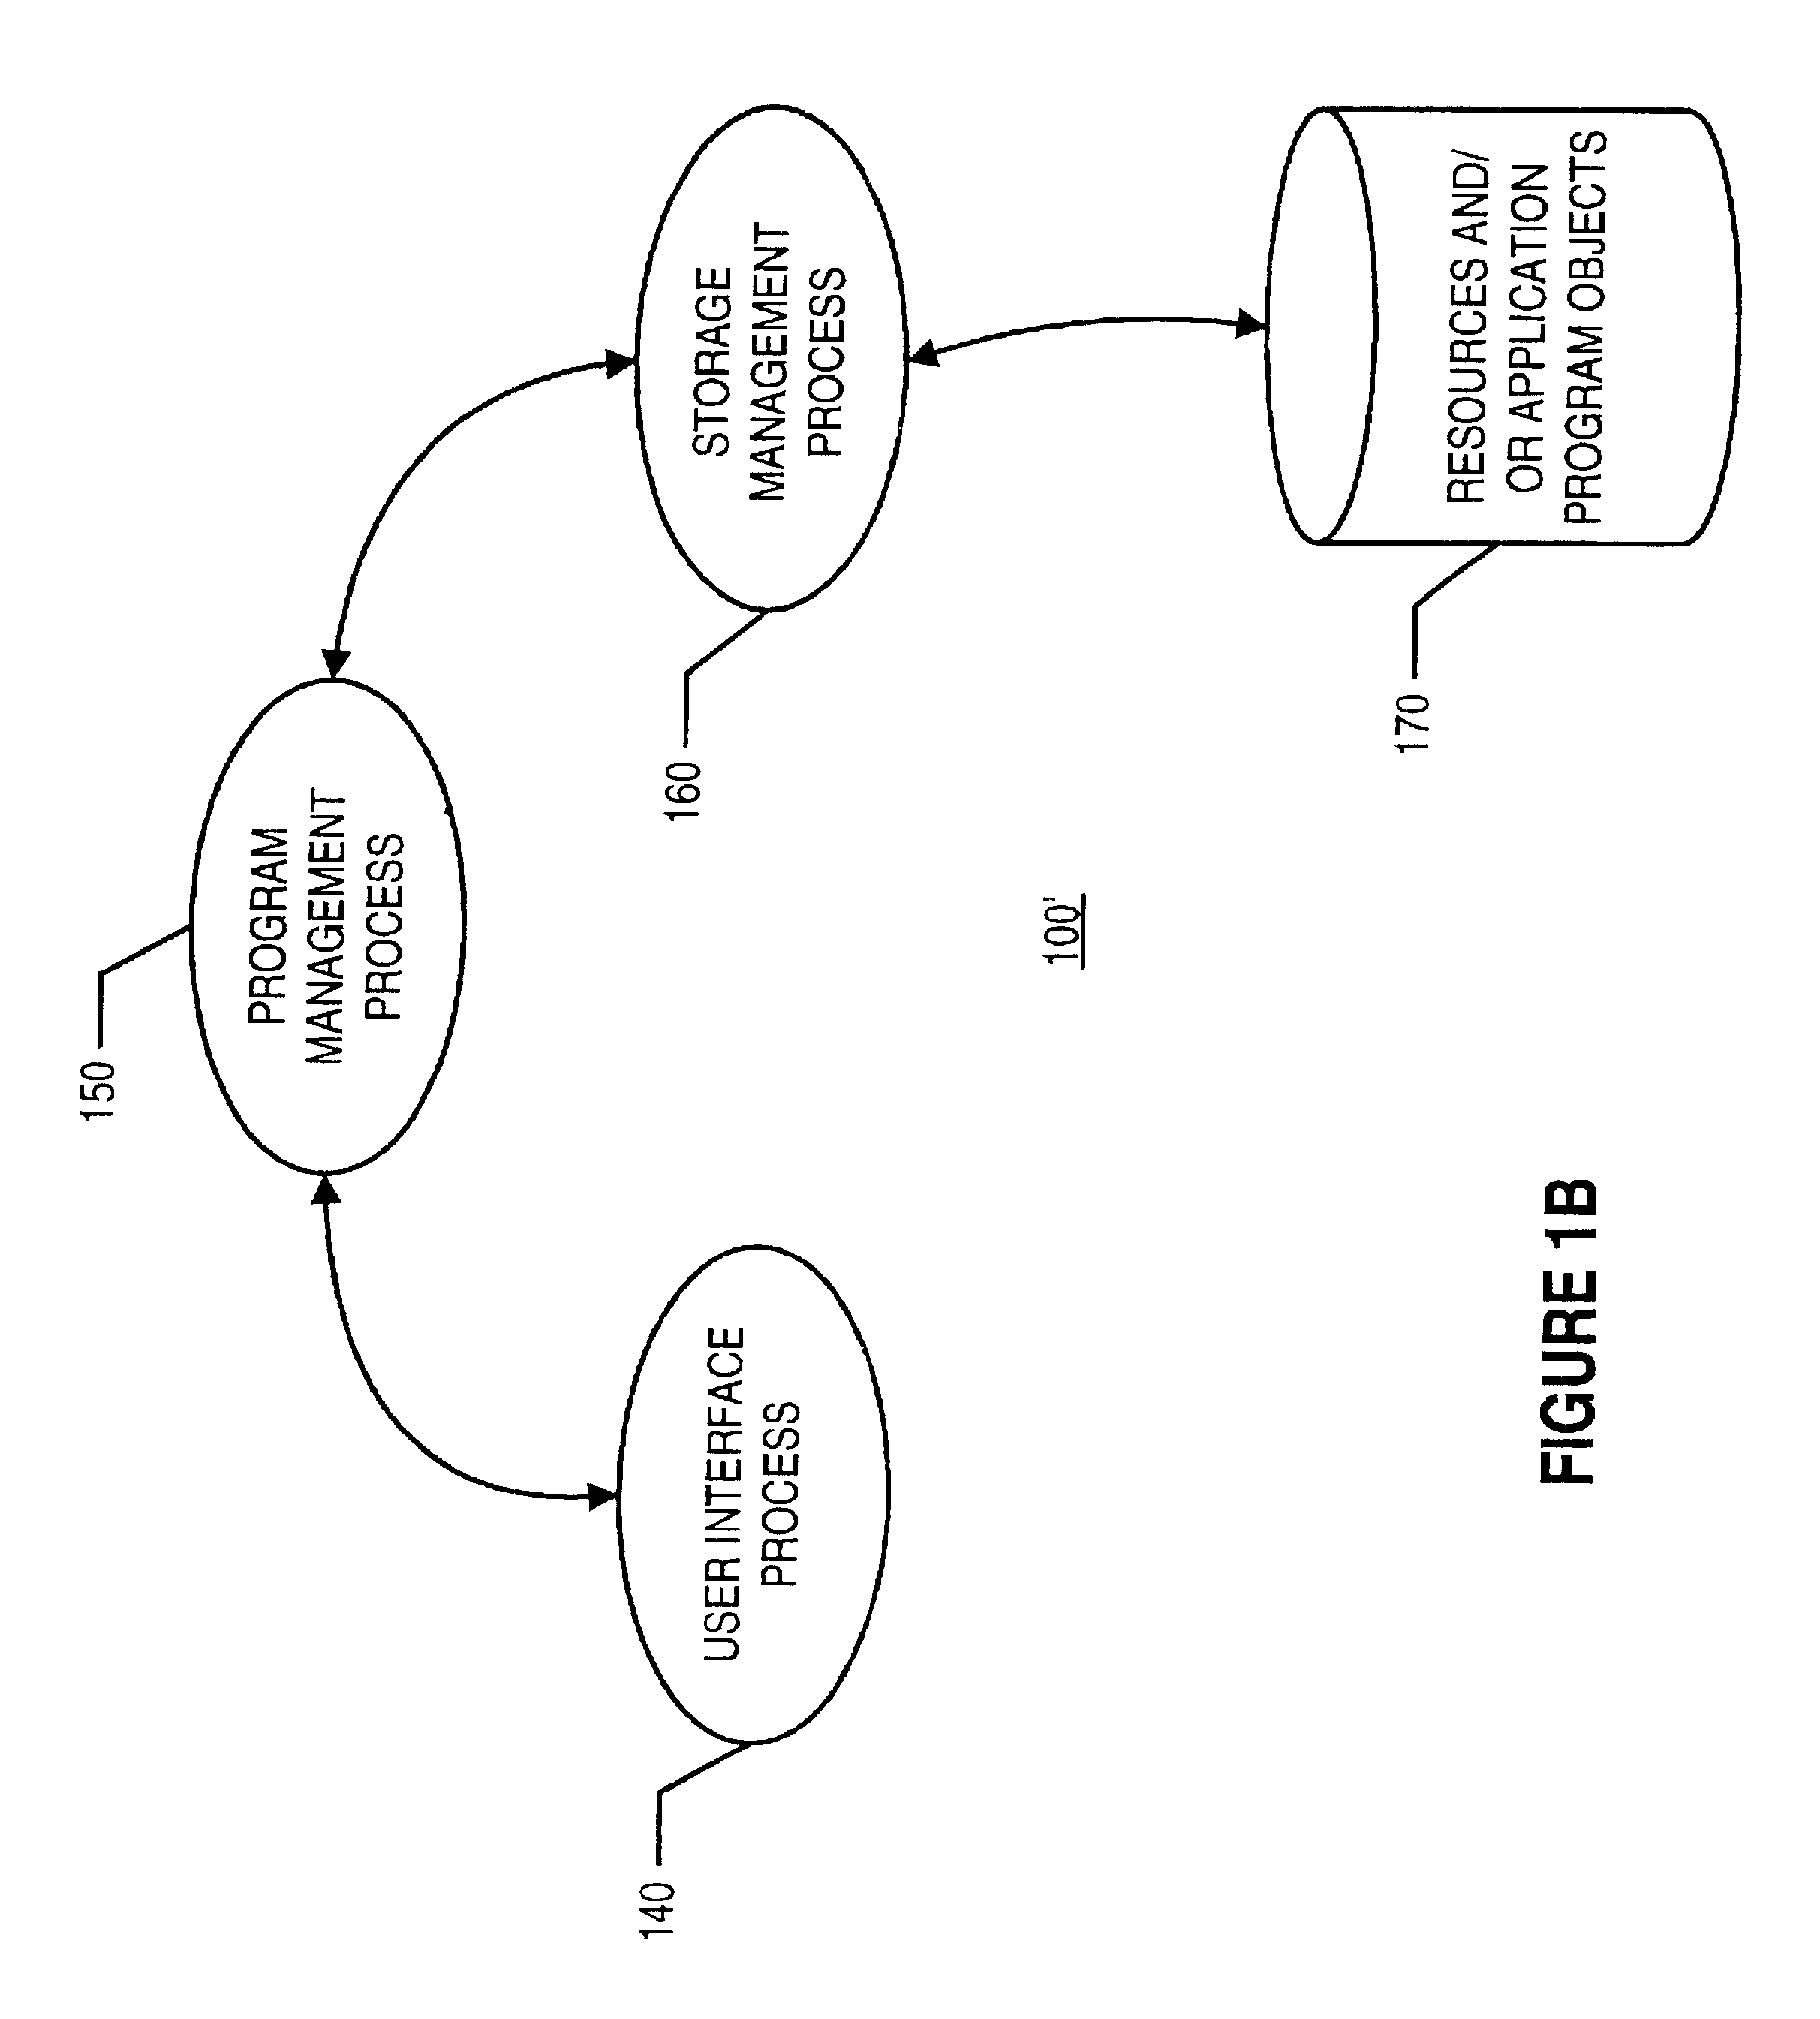 Methods and apparatus for using task models to help computer users complete tasks